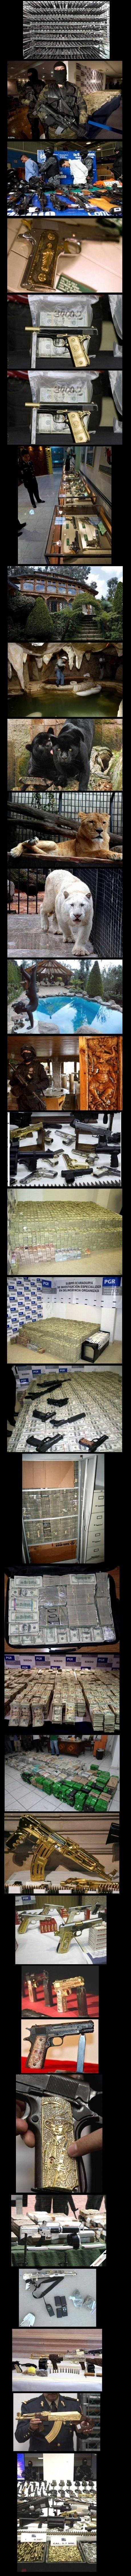 How Rich is a Drug Dealer. Who's so awesome?.. i guarantee at least 25% of those cops instantly there pants when they entered into this place